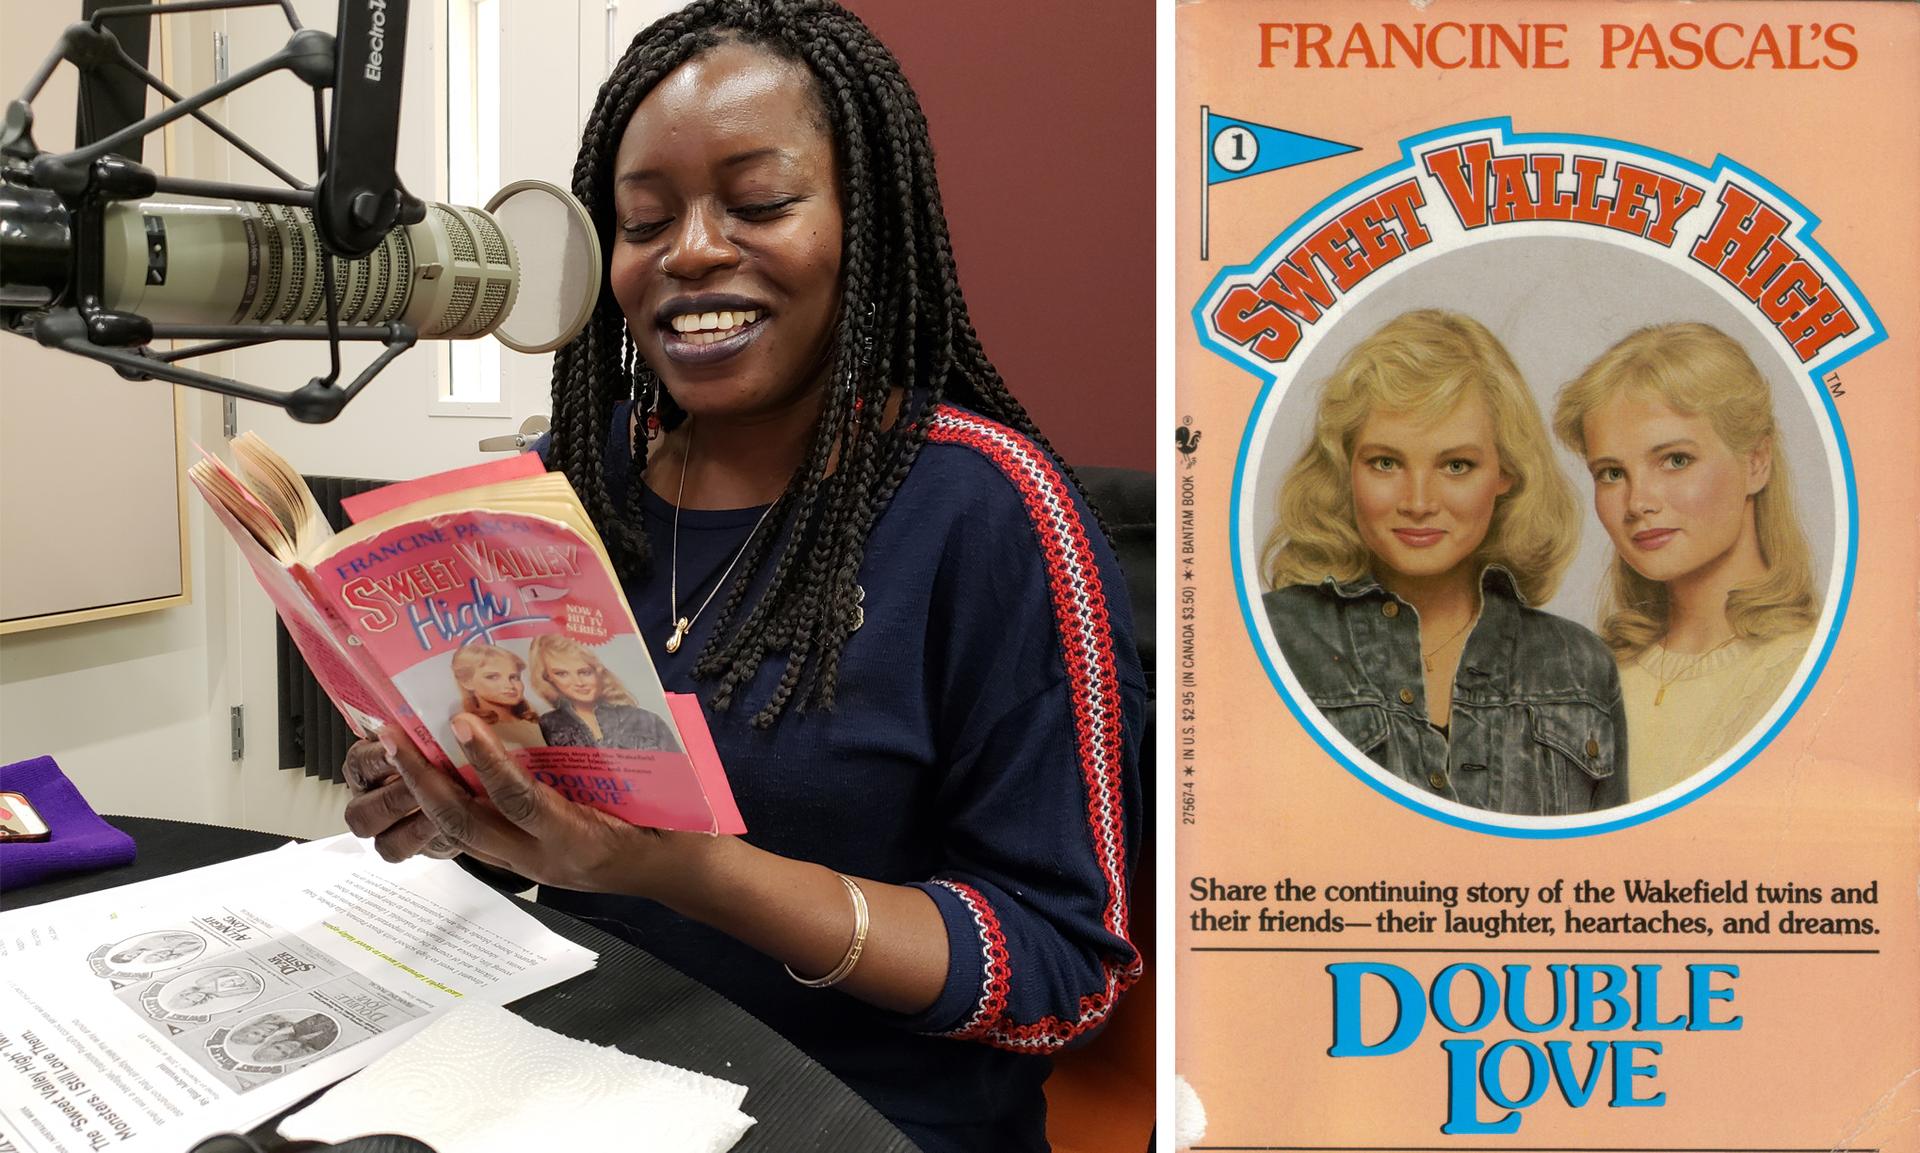 Bim Adewunmi reads from a “Sweet Valley” book in the Studio 360 studios; the first “Sweet Valley High” book, by Francine Pascal.